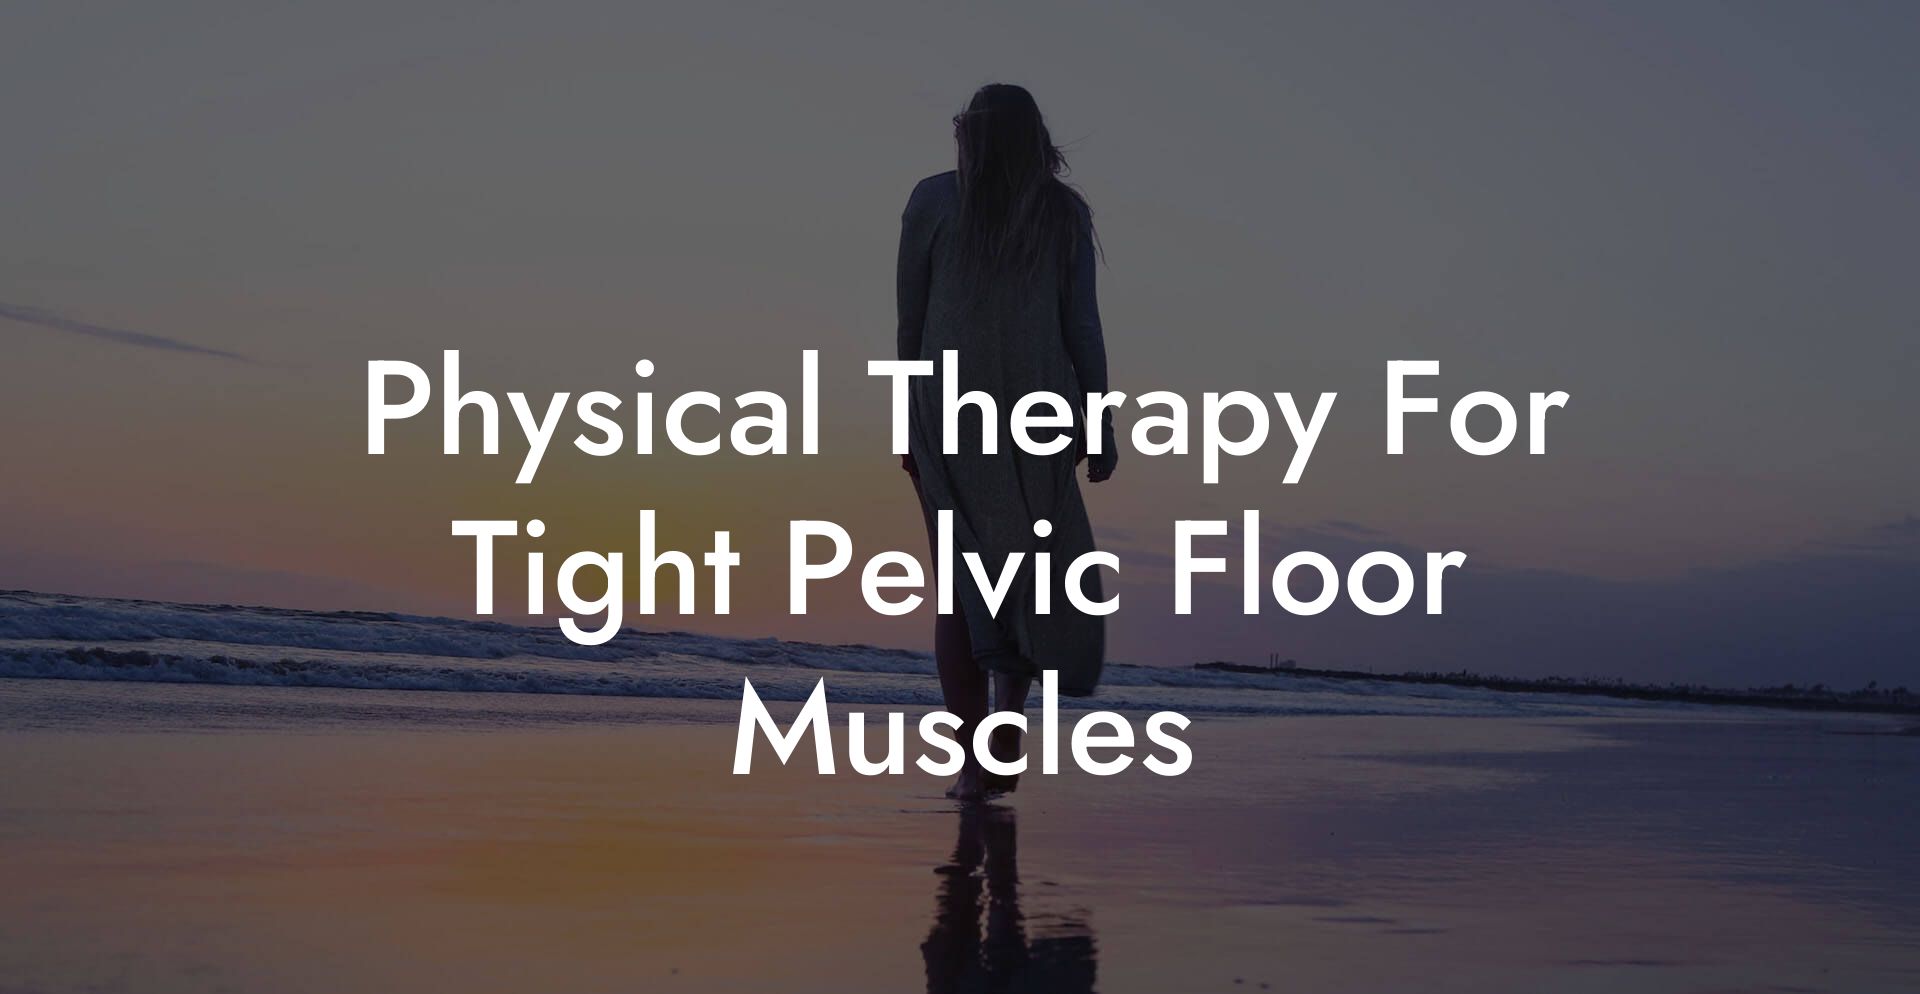 Physical Therapy For Tight Pelvic Floor Muscles